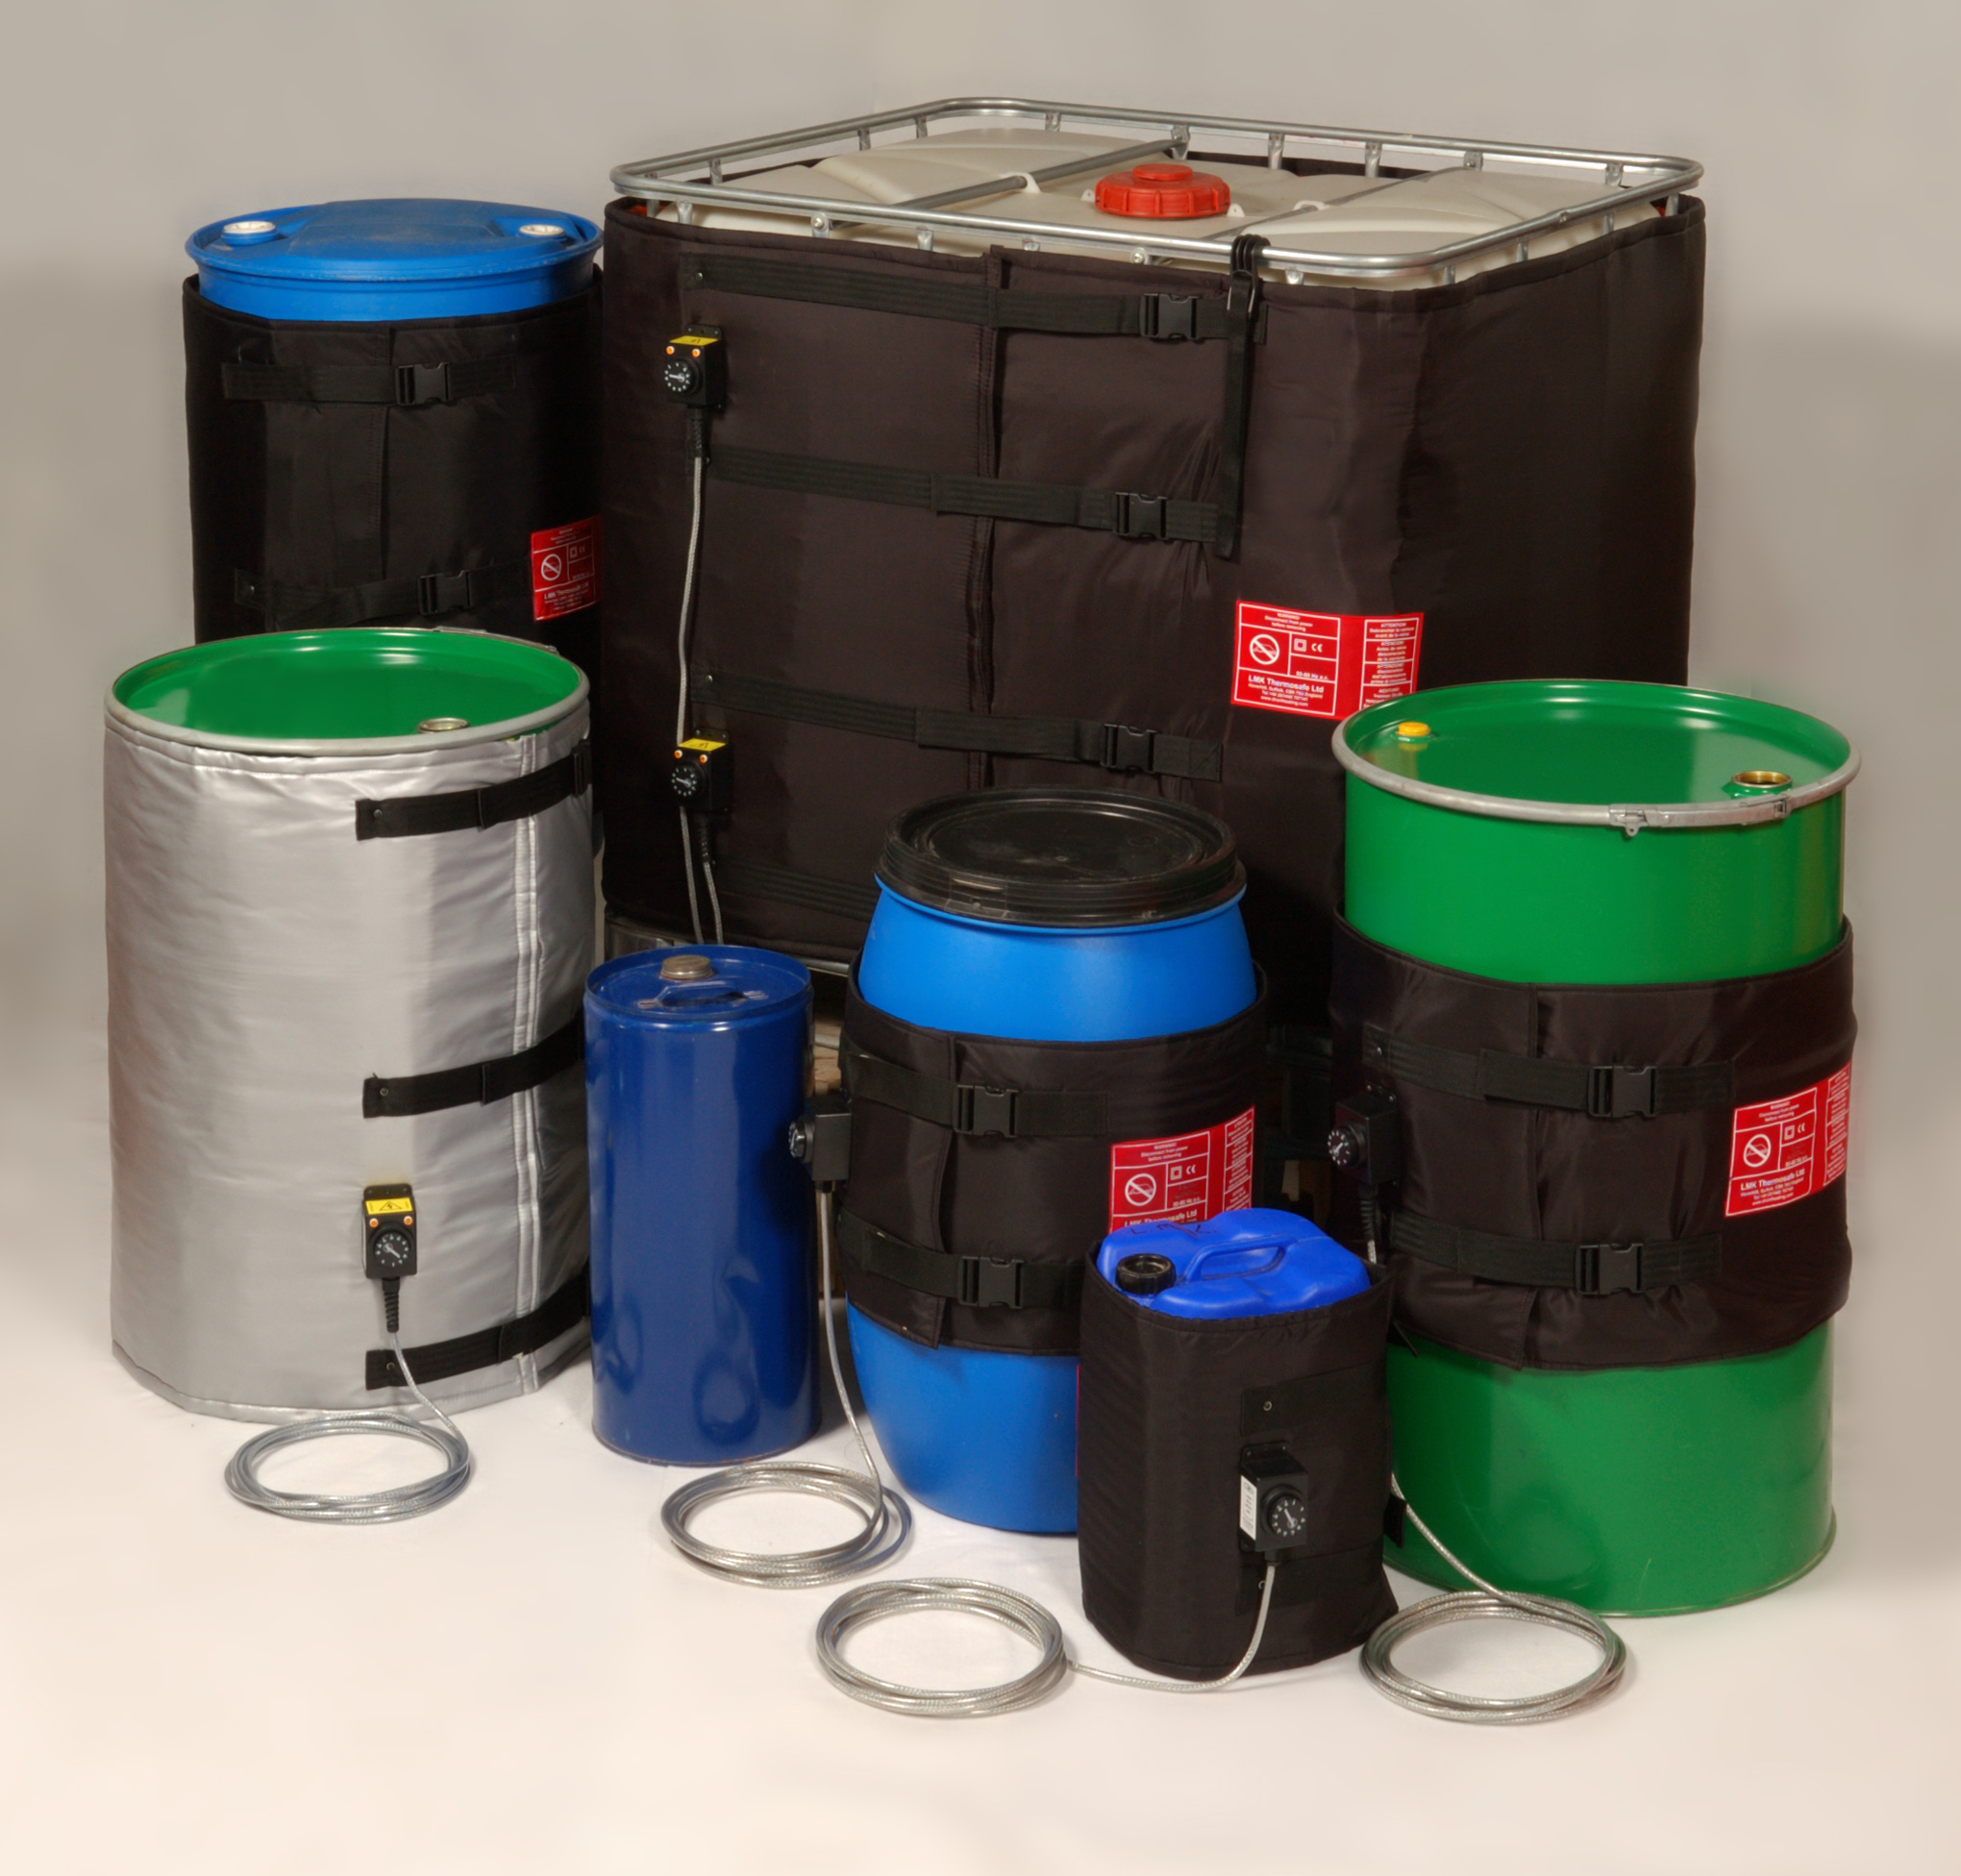 Insulated Flexible Heating Jackets for Drums and Containers